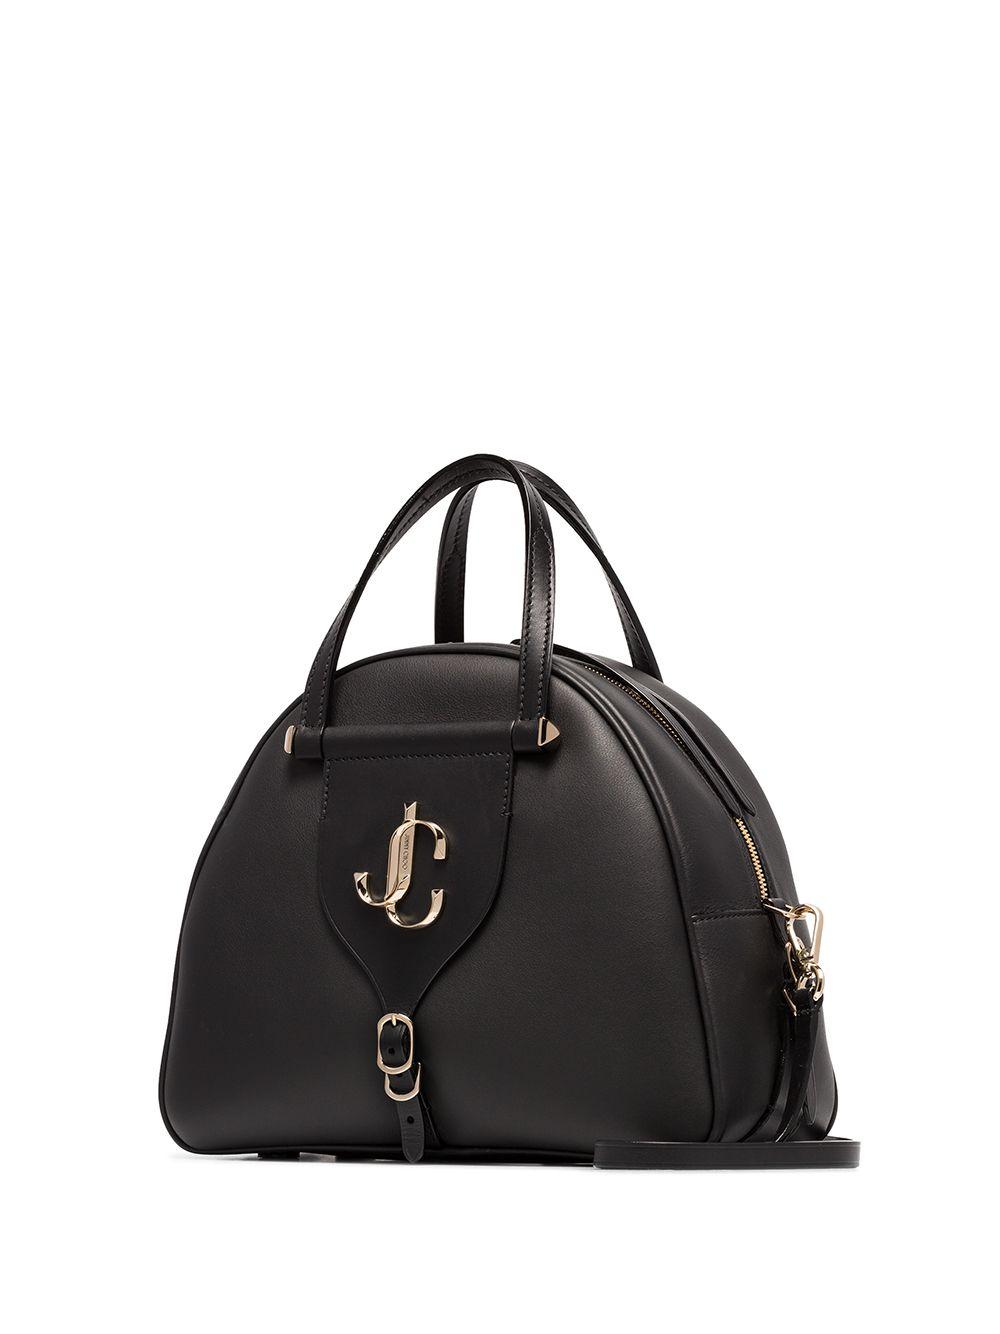 Jimmy Choo Leather Varenne Small Bowling Bag in Black | Lyst